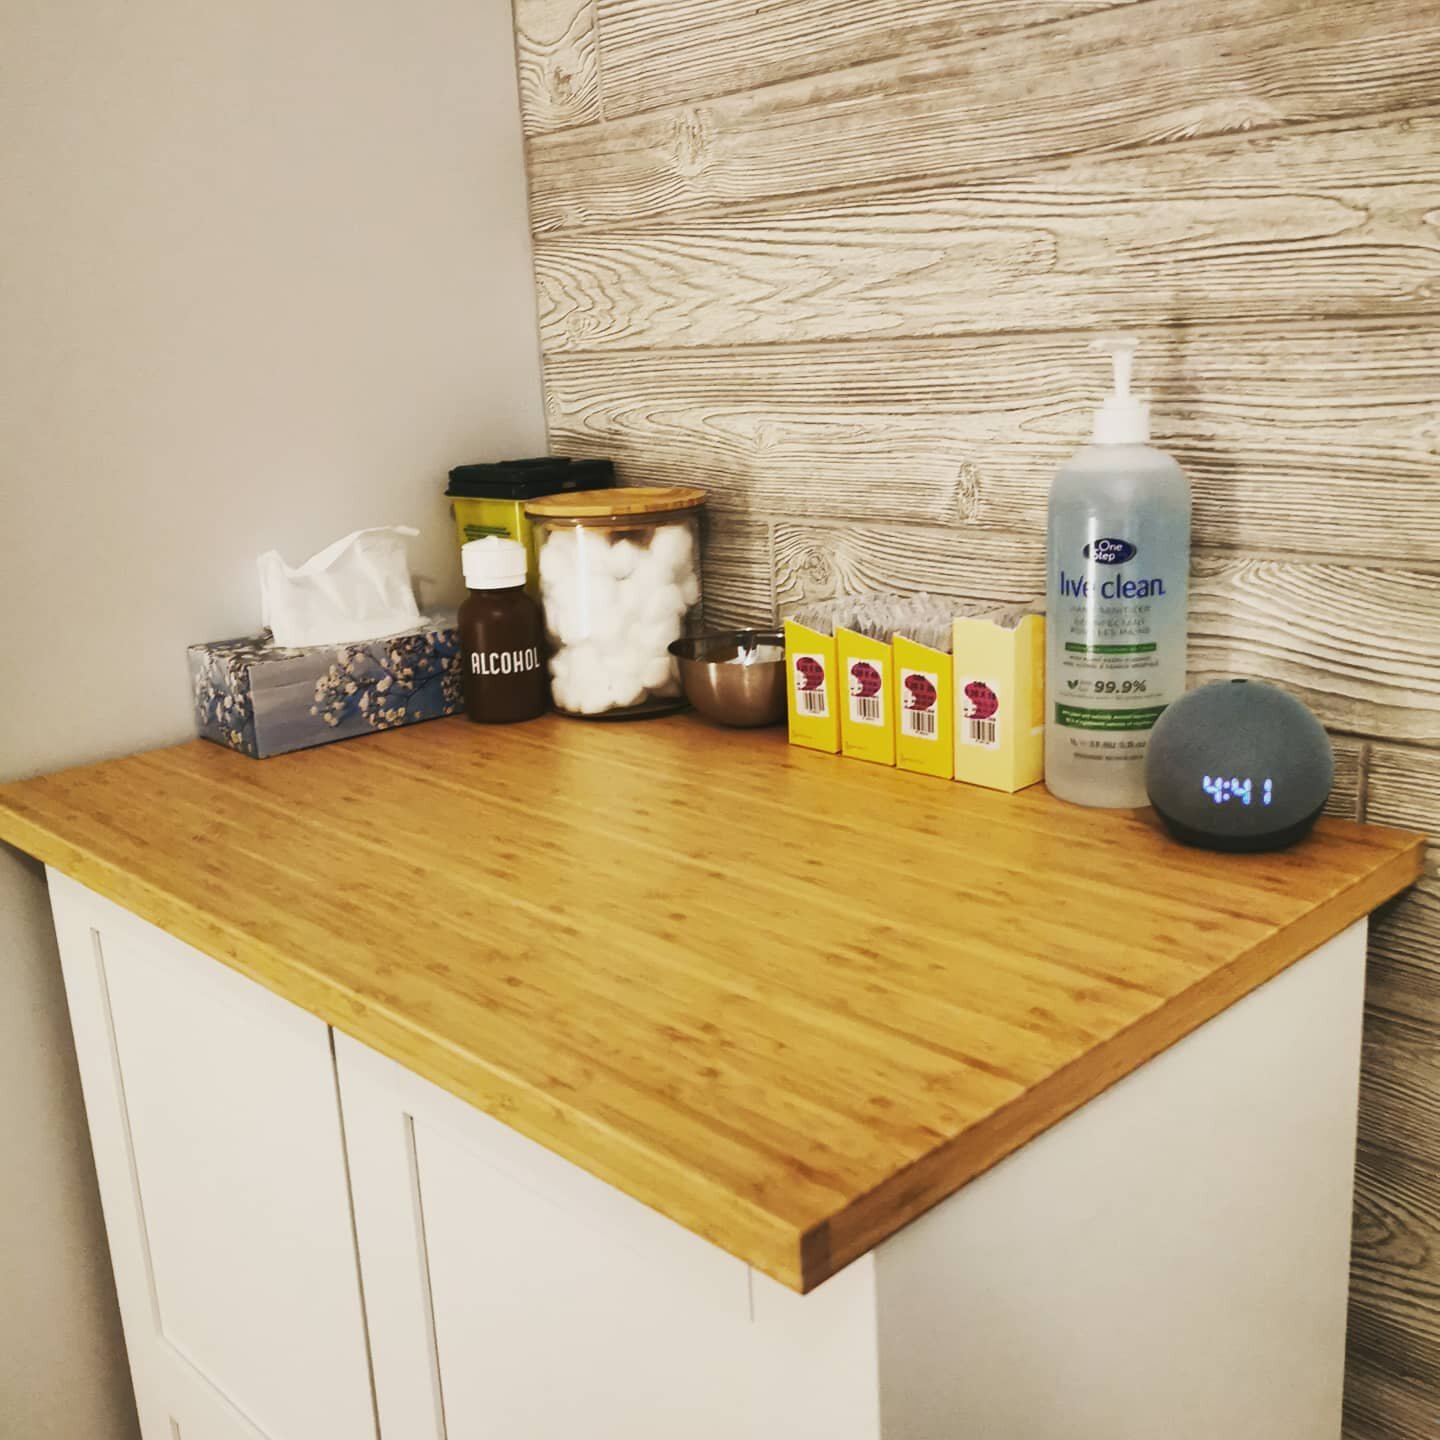 There will be no bets placed on how long the organized neatness will last, thank you very much. (I bet 2 days)
.
.
.
The clinic opens tomorrow and I can hardly wait to get treating, I've missed everyone!
.
.
.
#yegmassage #yegacupuncture #yegwellness